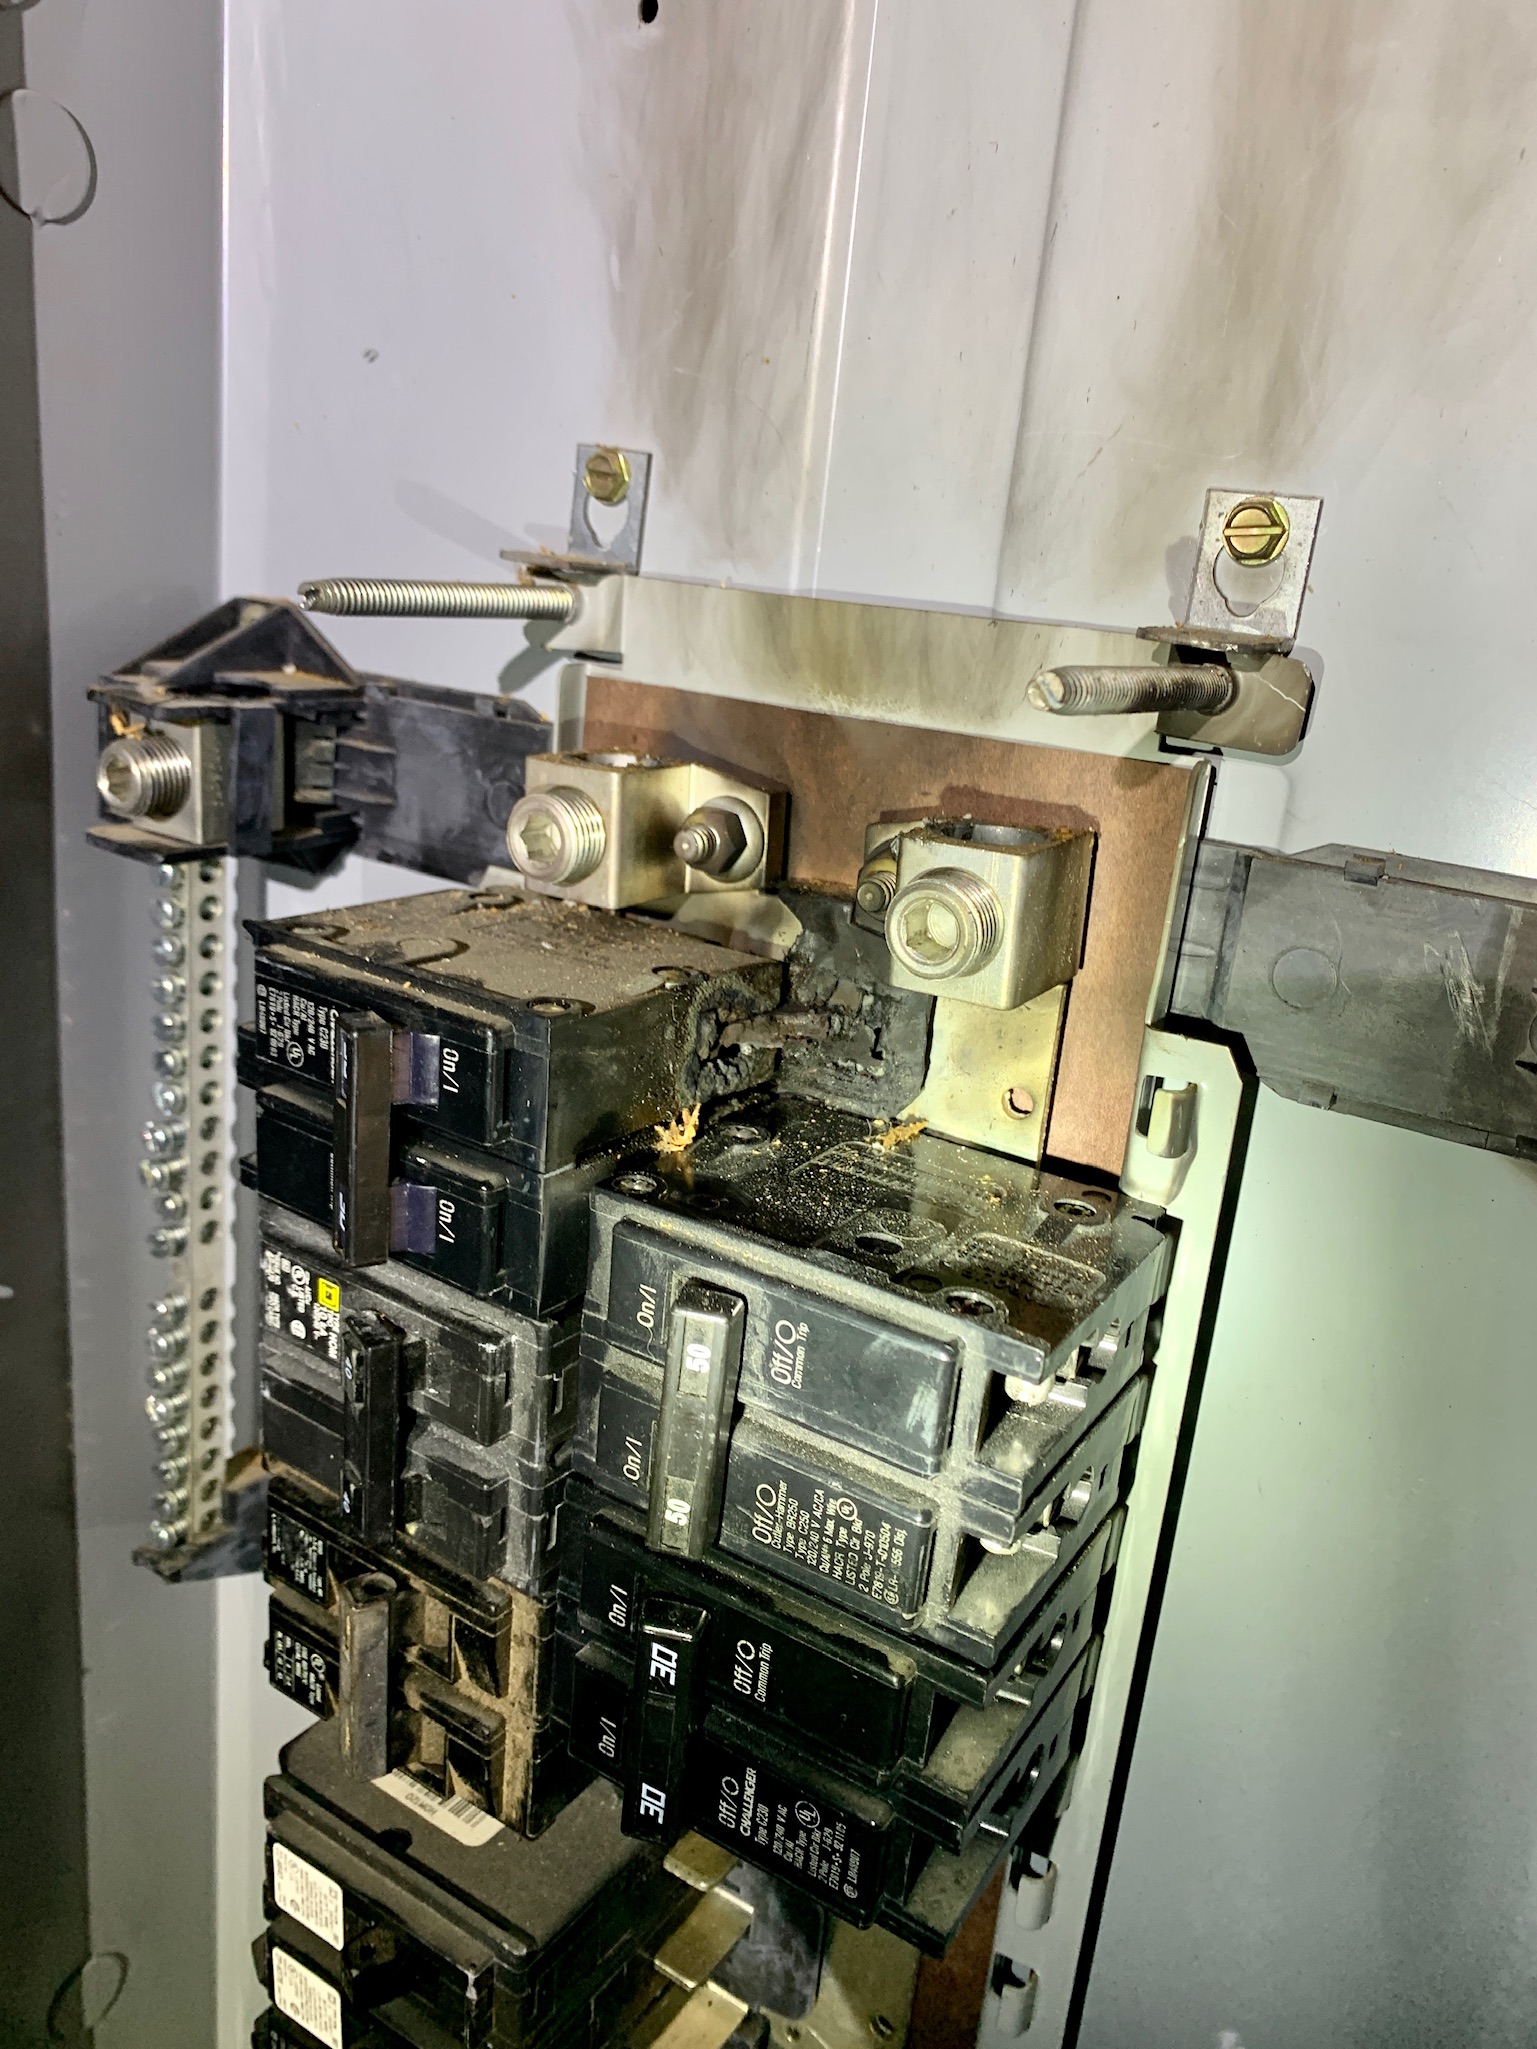 Burnt Breaker and need panel replacement in Holly Springs